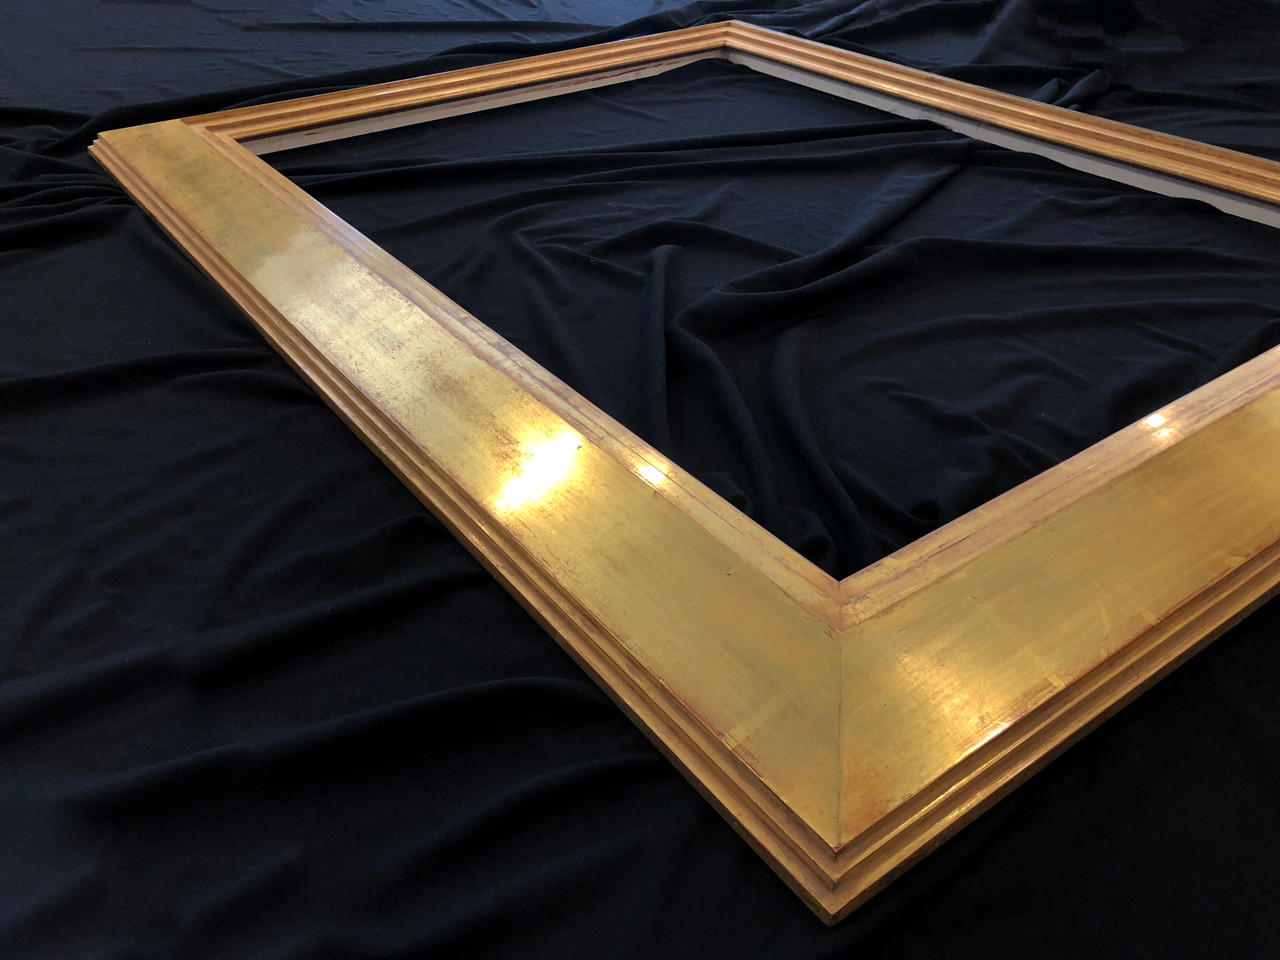 Postcard Frames are available in wood finishes, colors, gold